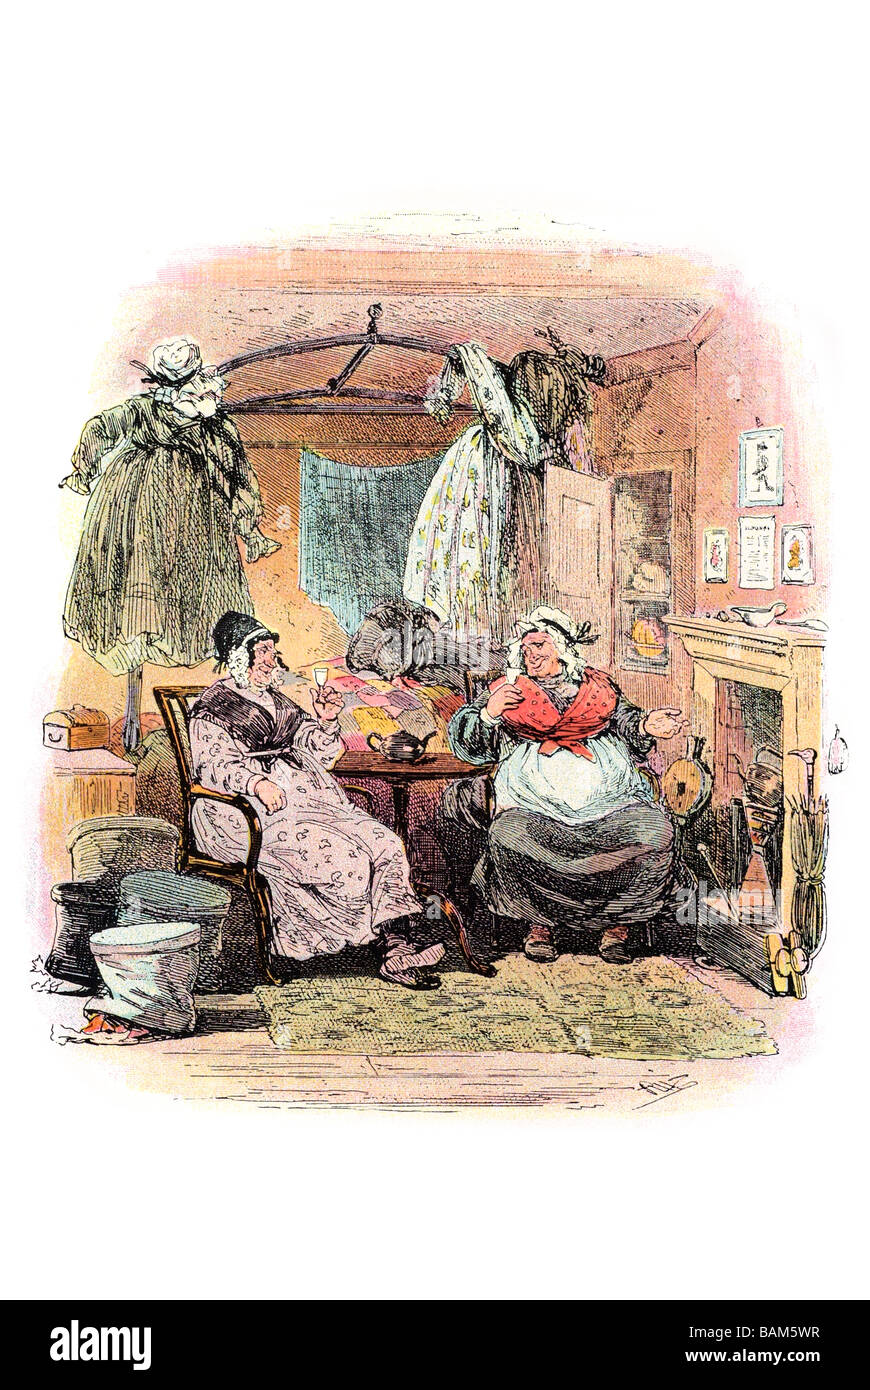 mrs gamp propoges a toast The Life and Adventures of Martin Chuzzlewit charles dickens Stock Photo